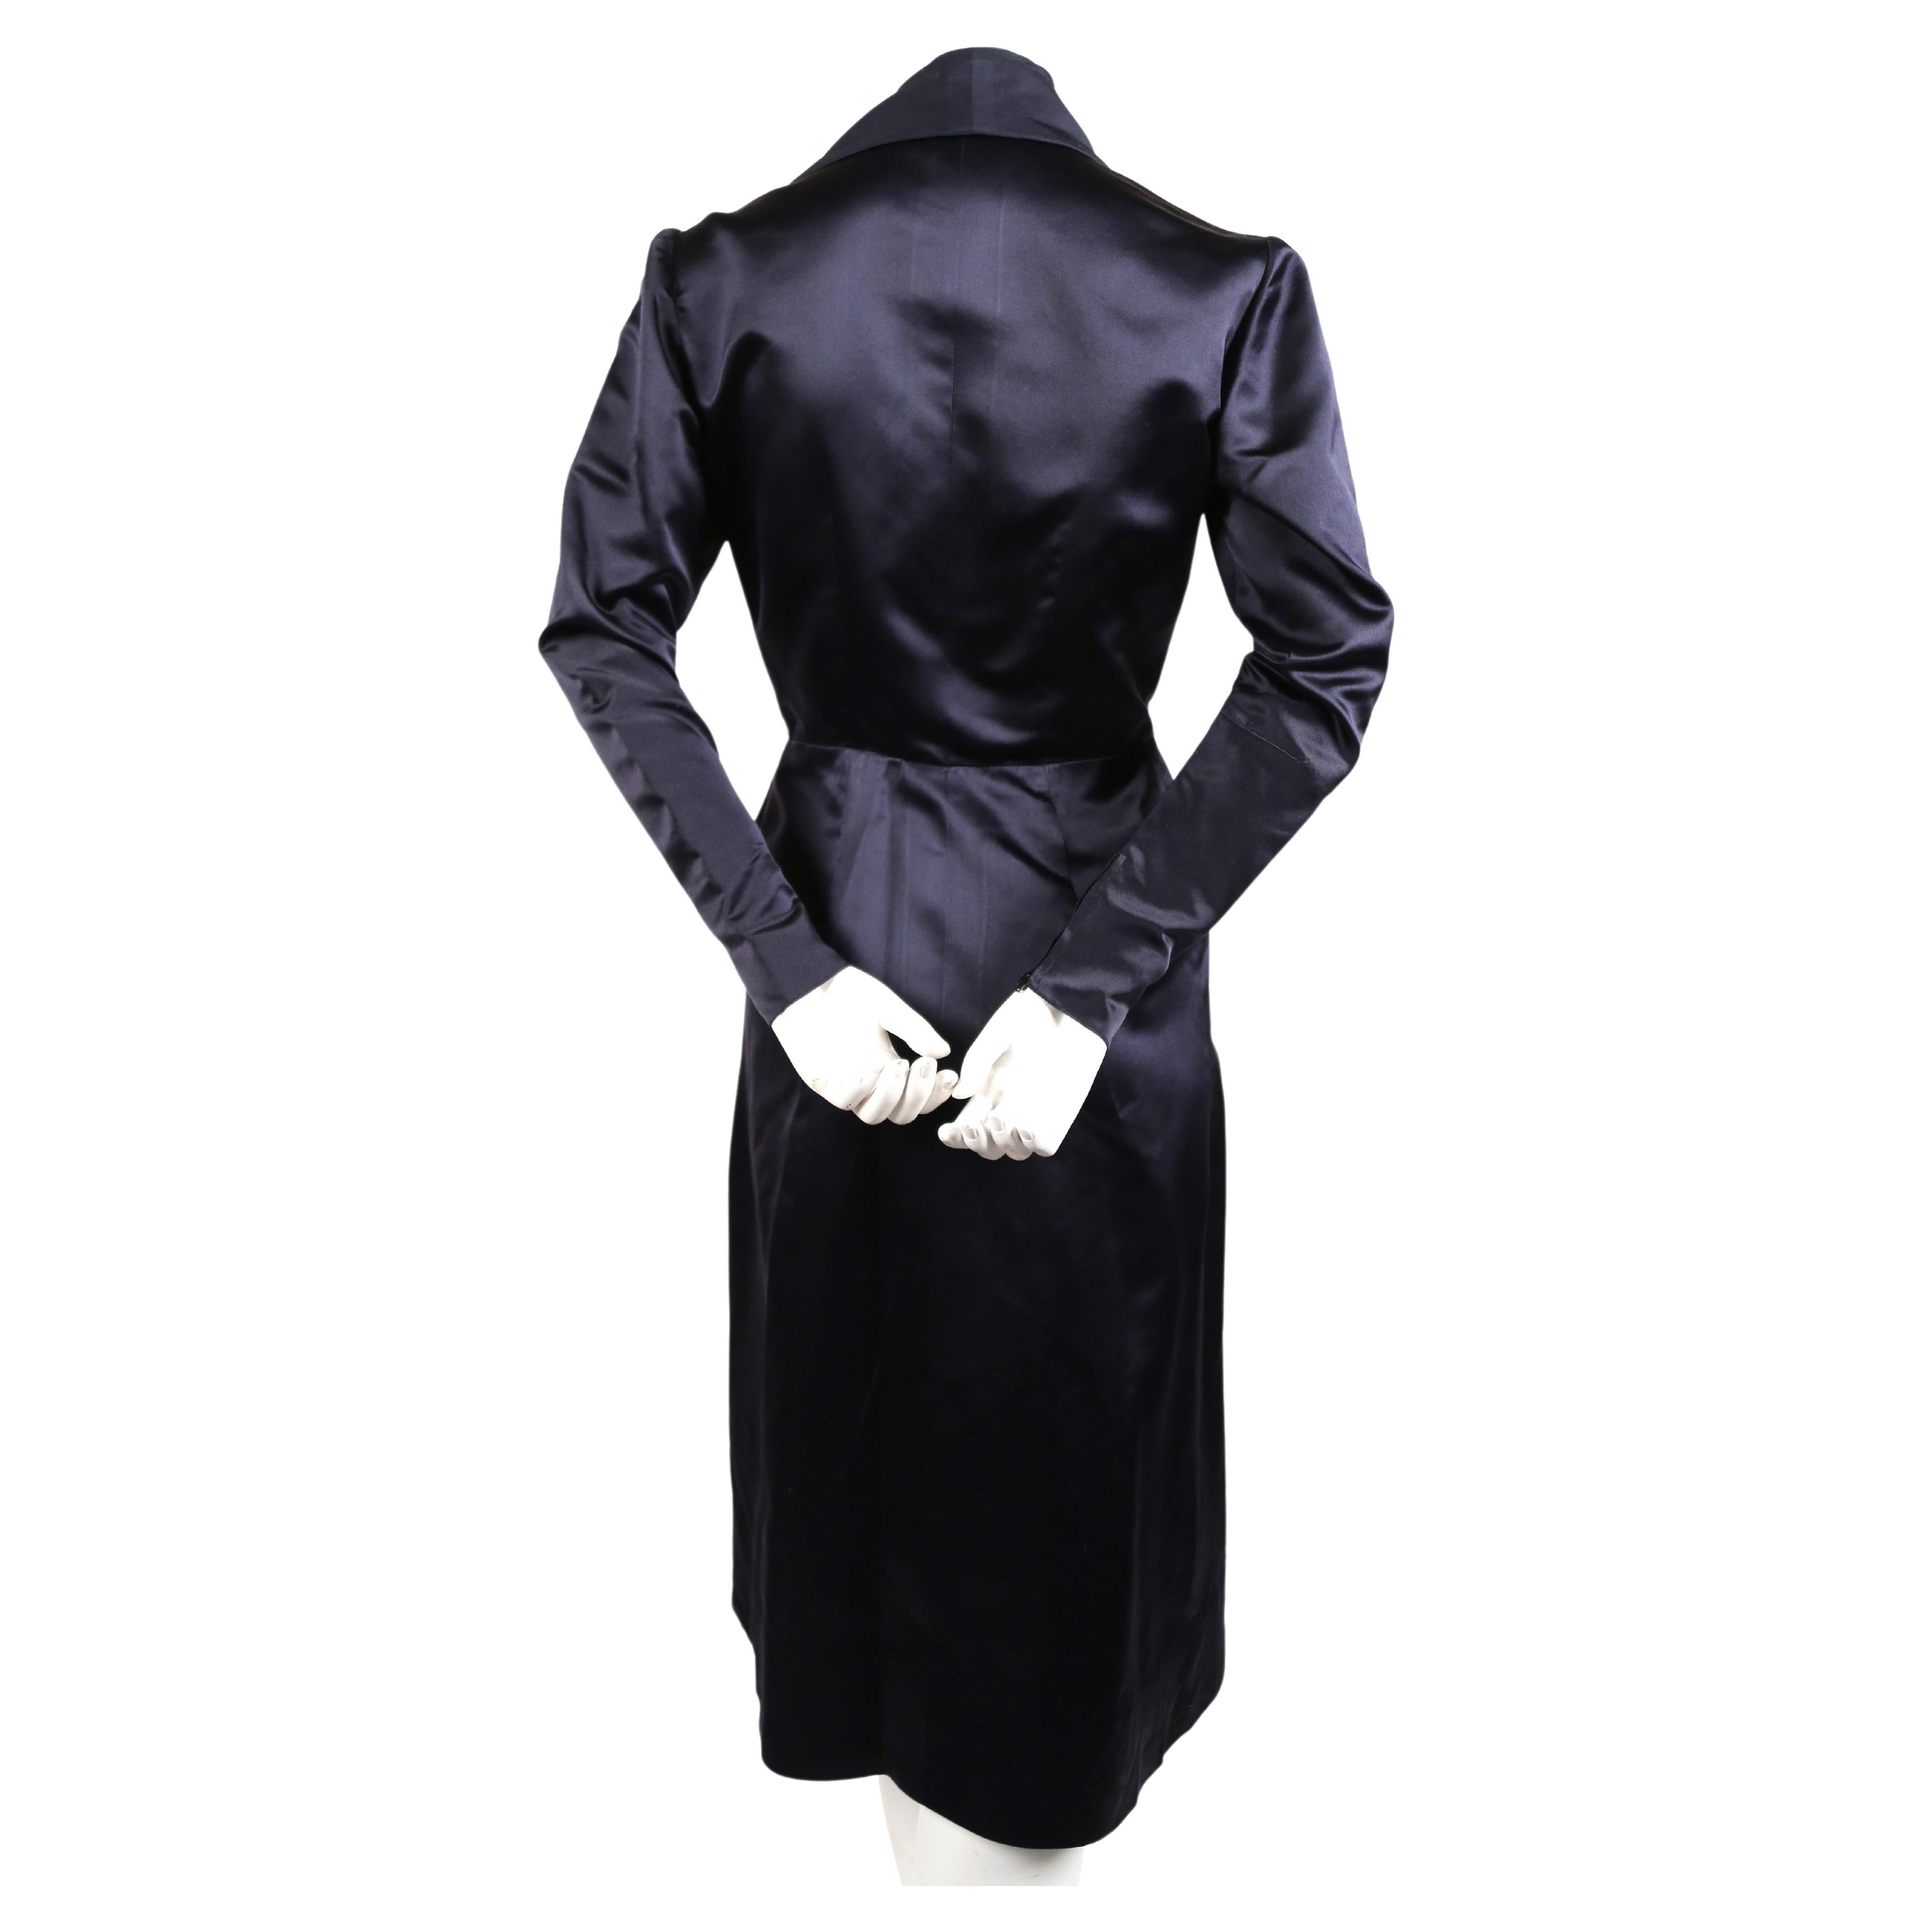 Very rare navy satin coat dress designed by Jacques Fath for Joseph Halpert dating to the 1940's. Best fits a size 4. Approximate measurements: shoulders 15